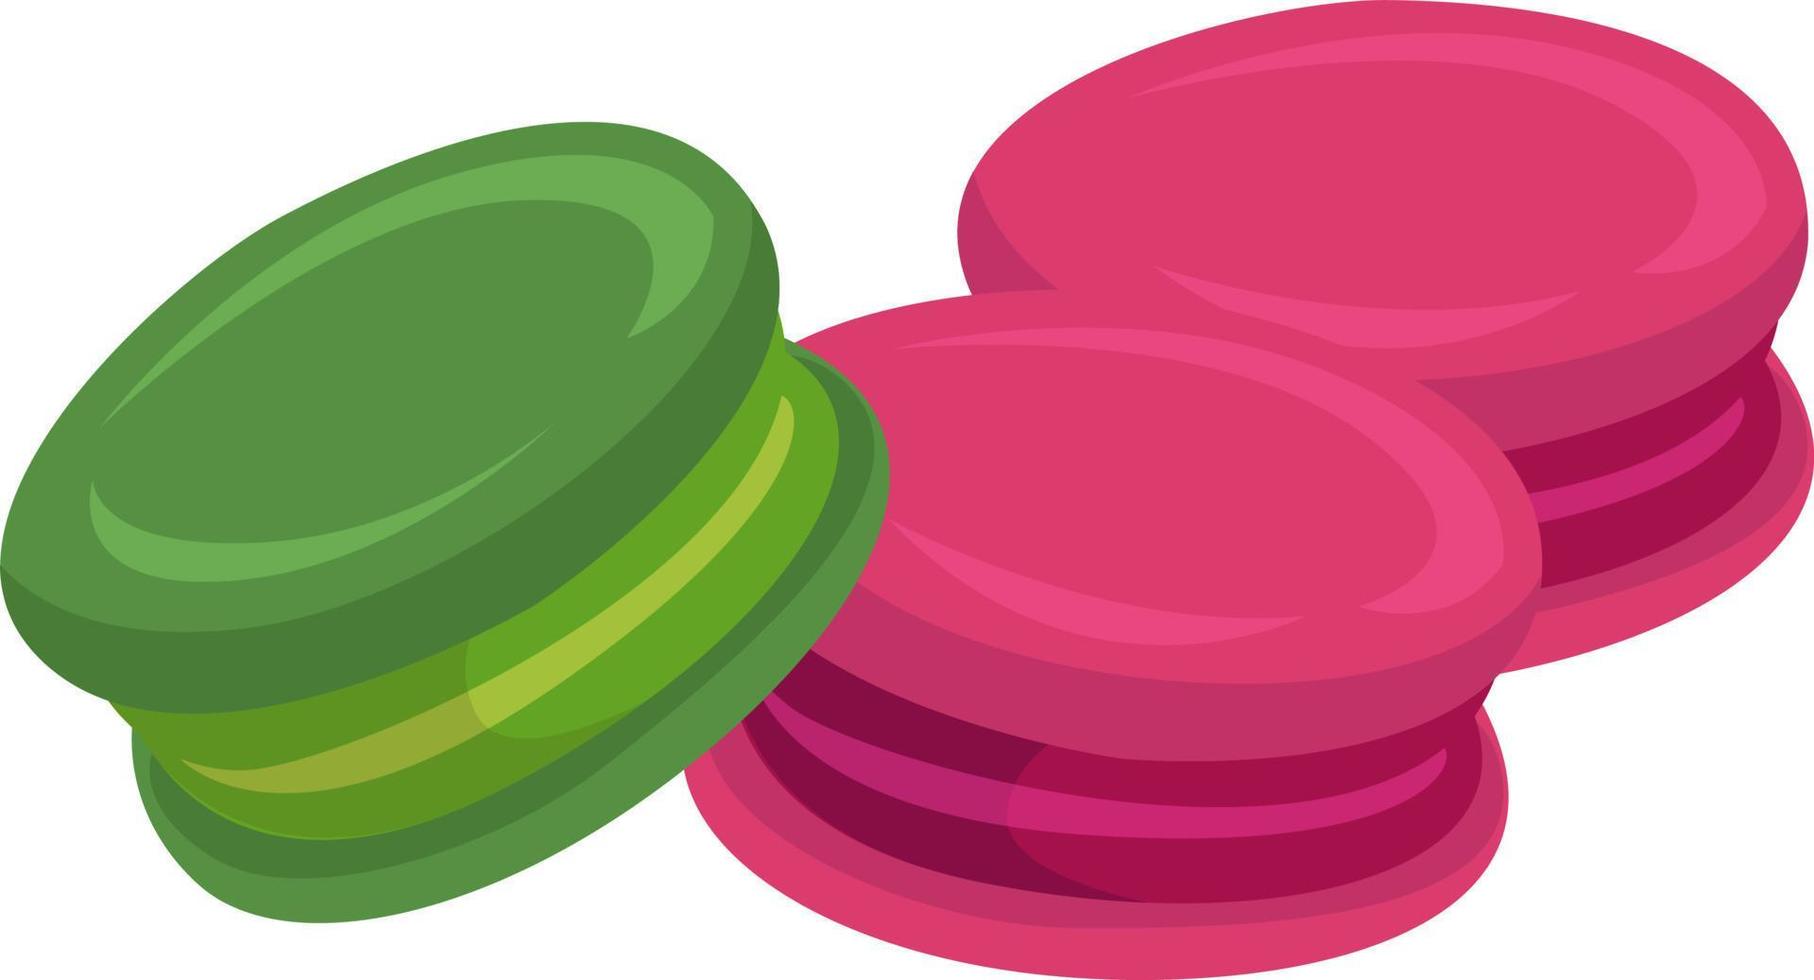 Colorful macaron, illustration, vector on white background